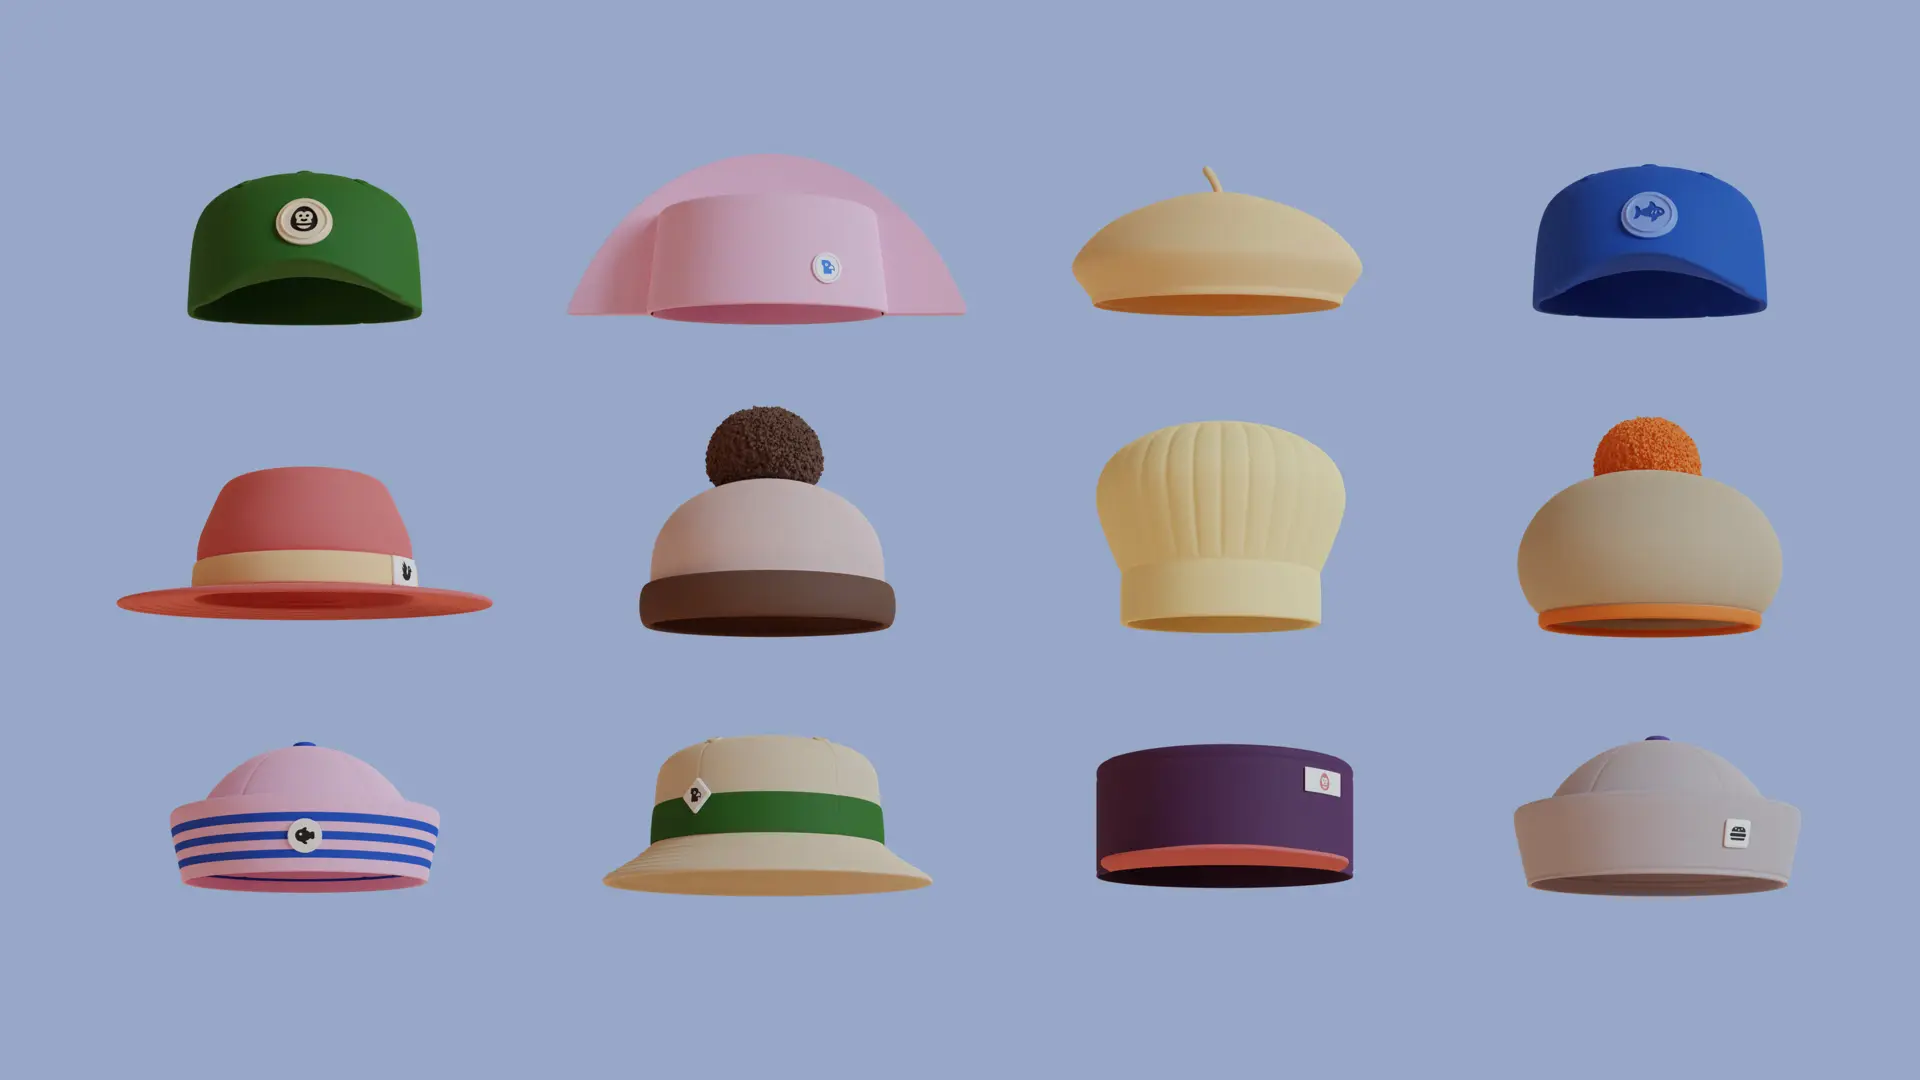 Collection of twelve different hats showcasing various styles and colors on a lavender background.